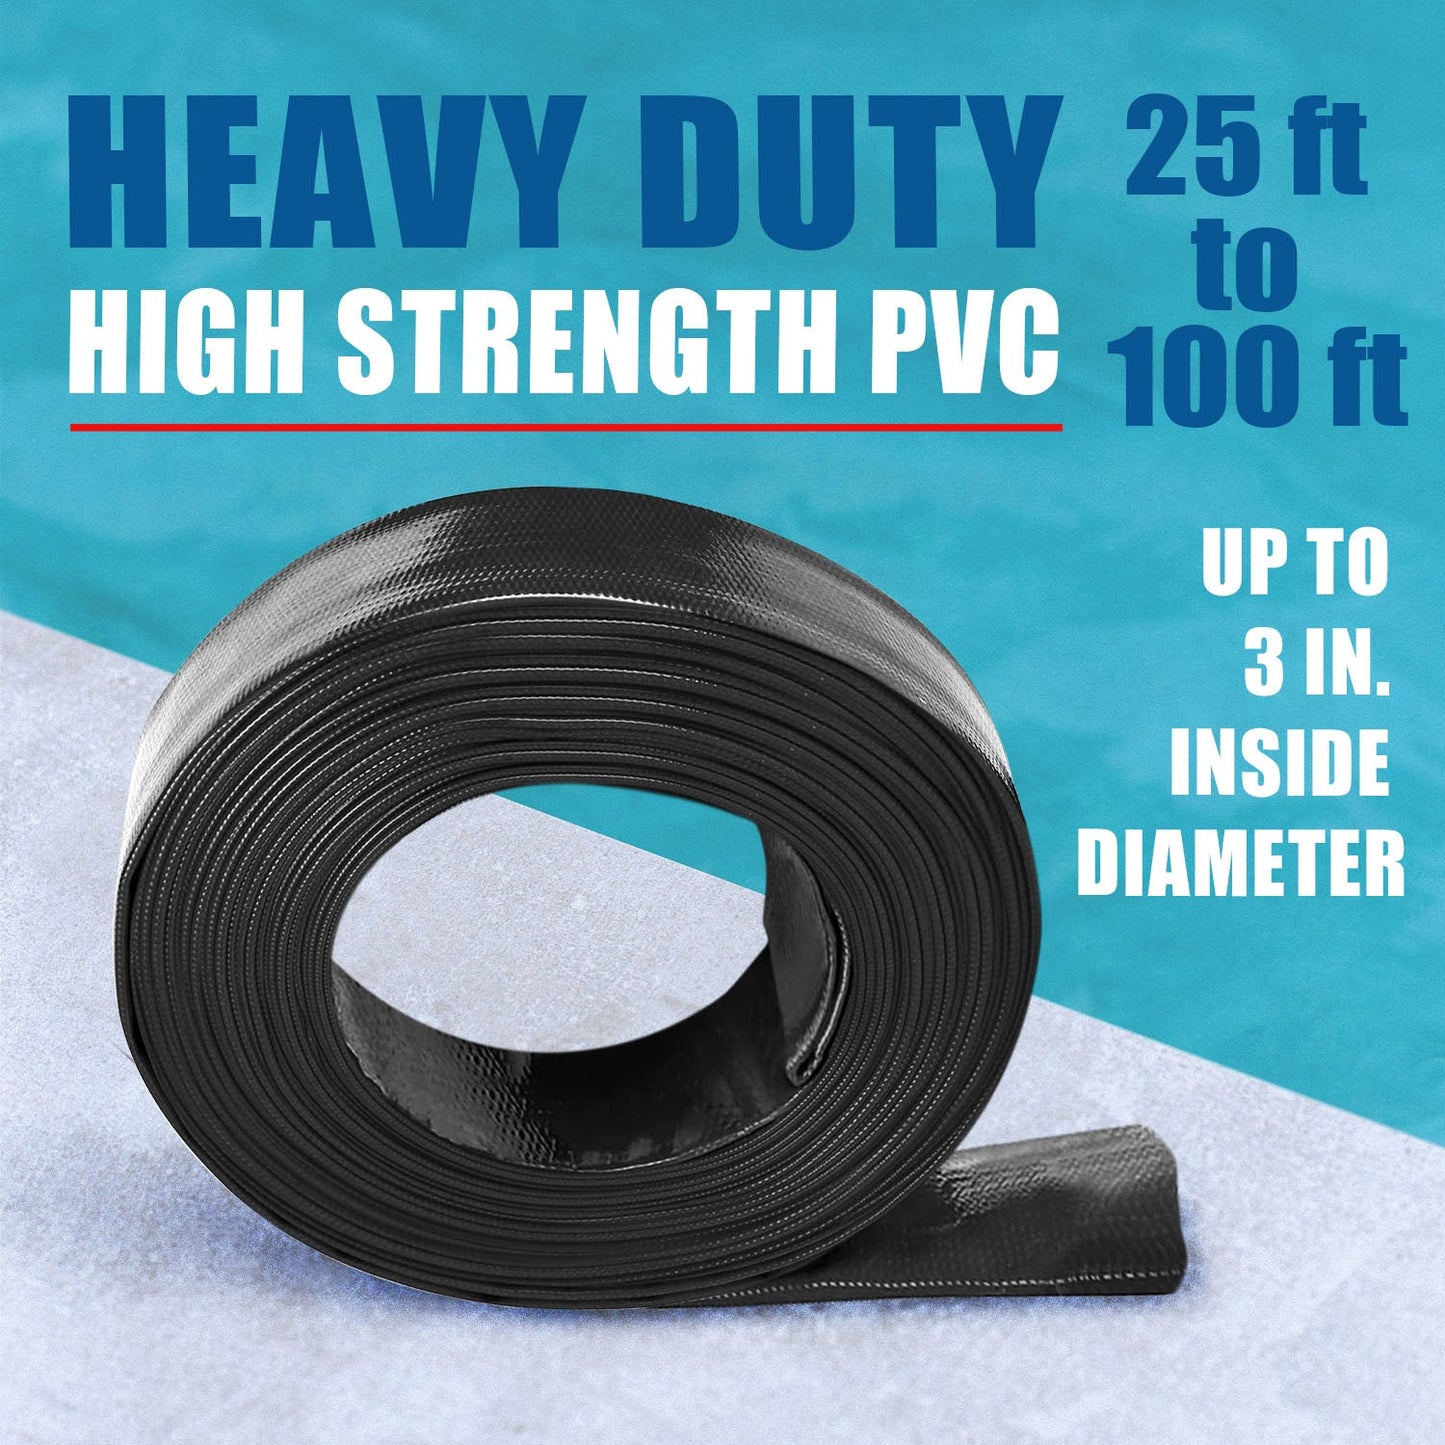 Water Discharge Backwash Pool Hose 2-1/2" 2.5" in inch x 50 FT Black (Open Box)